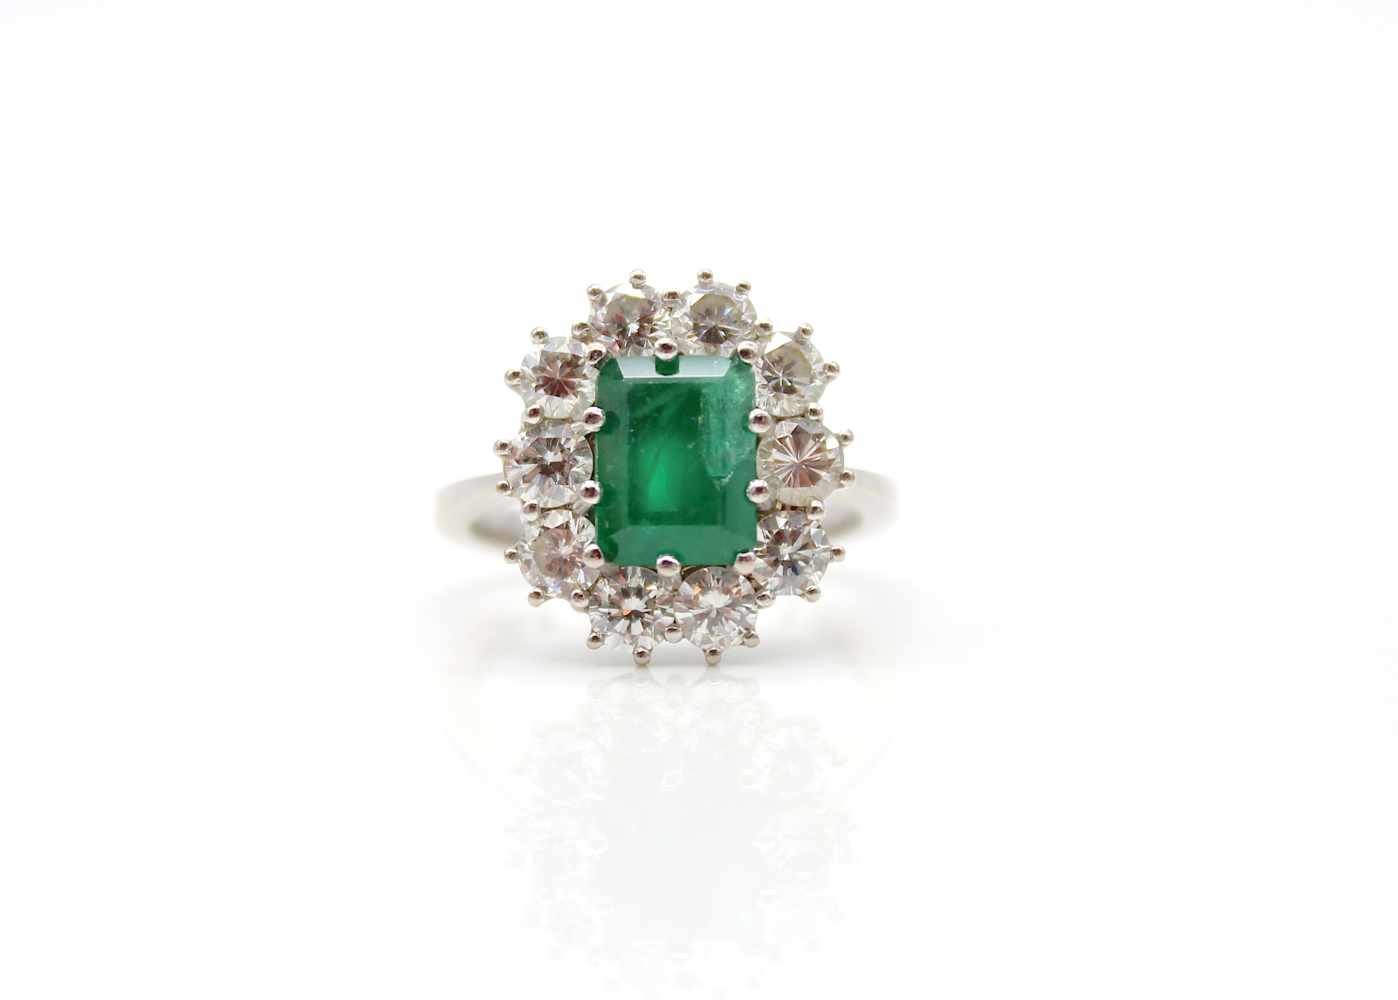 Ring made of 585 white gold with an emerald of approx. 2.1 ct and 10 diamonds, total approx. 1.9 ct, - Image 3 of 3